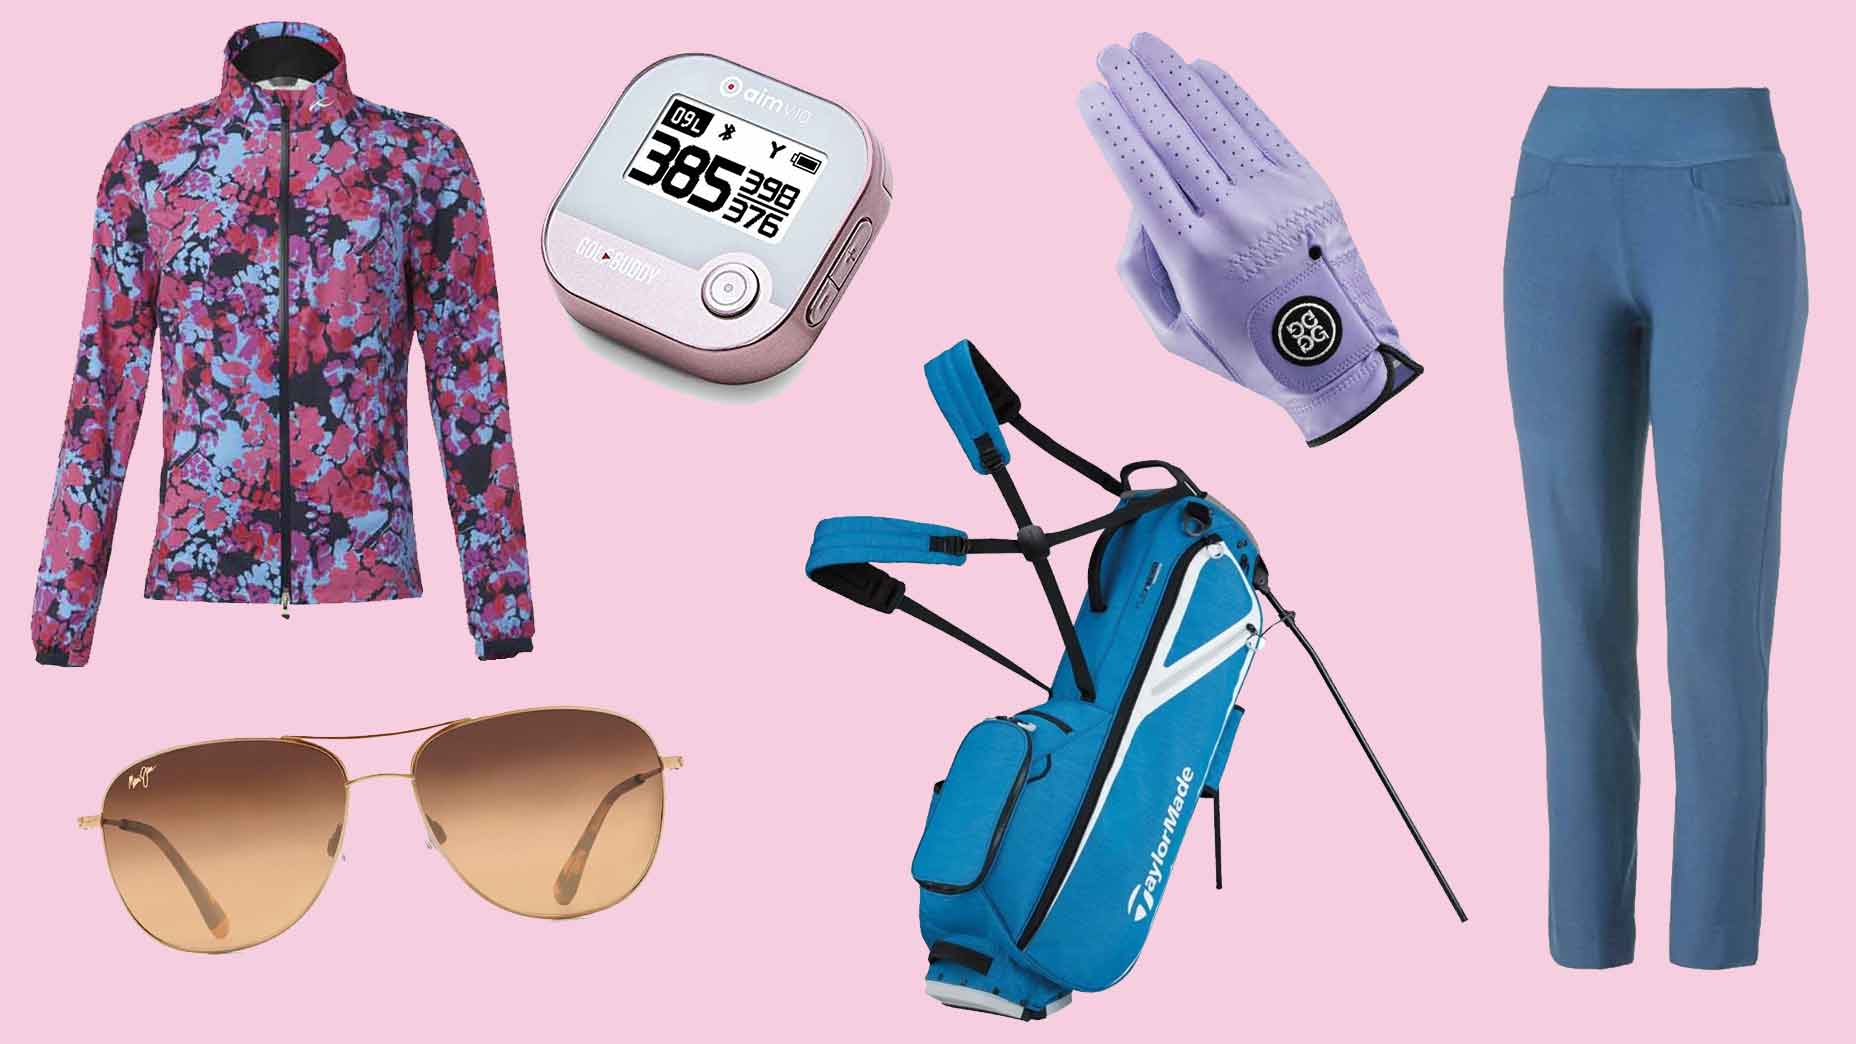 small golf gifts for ladies